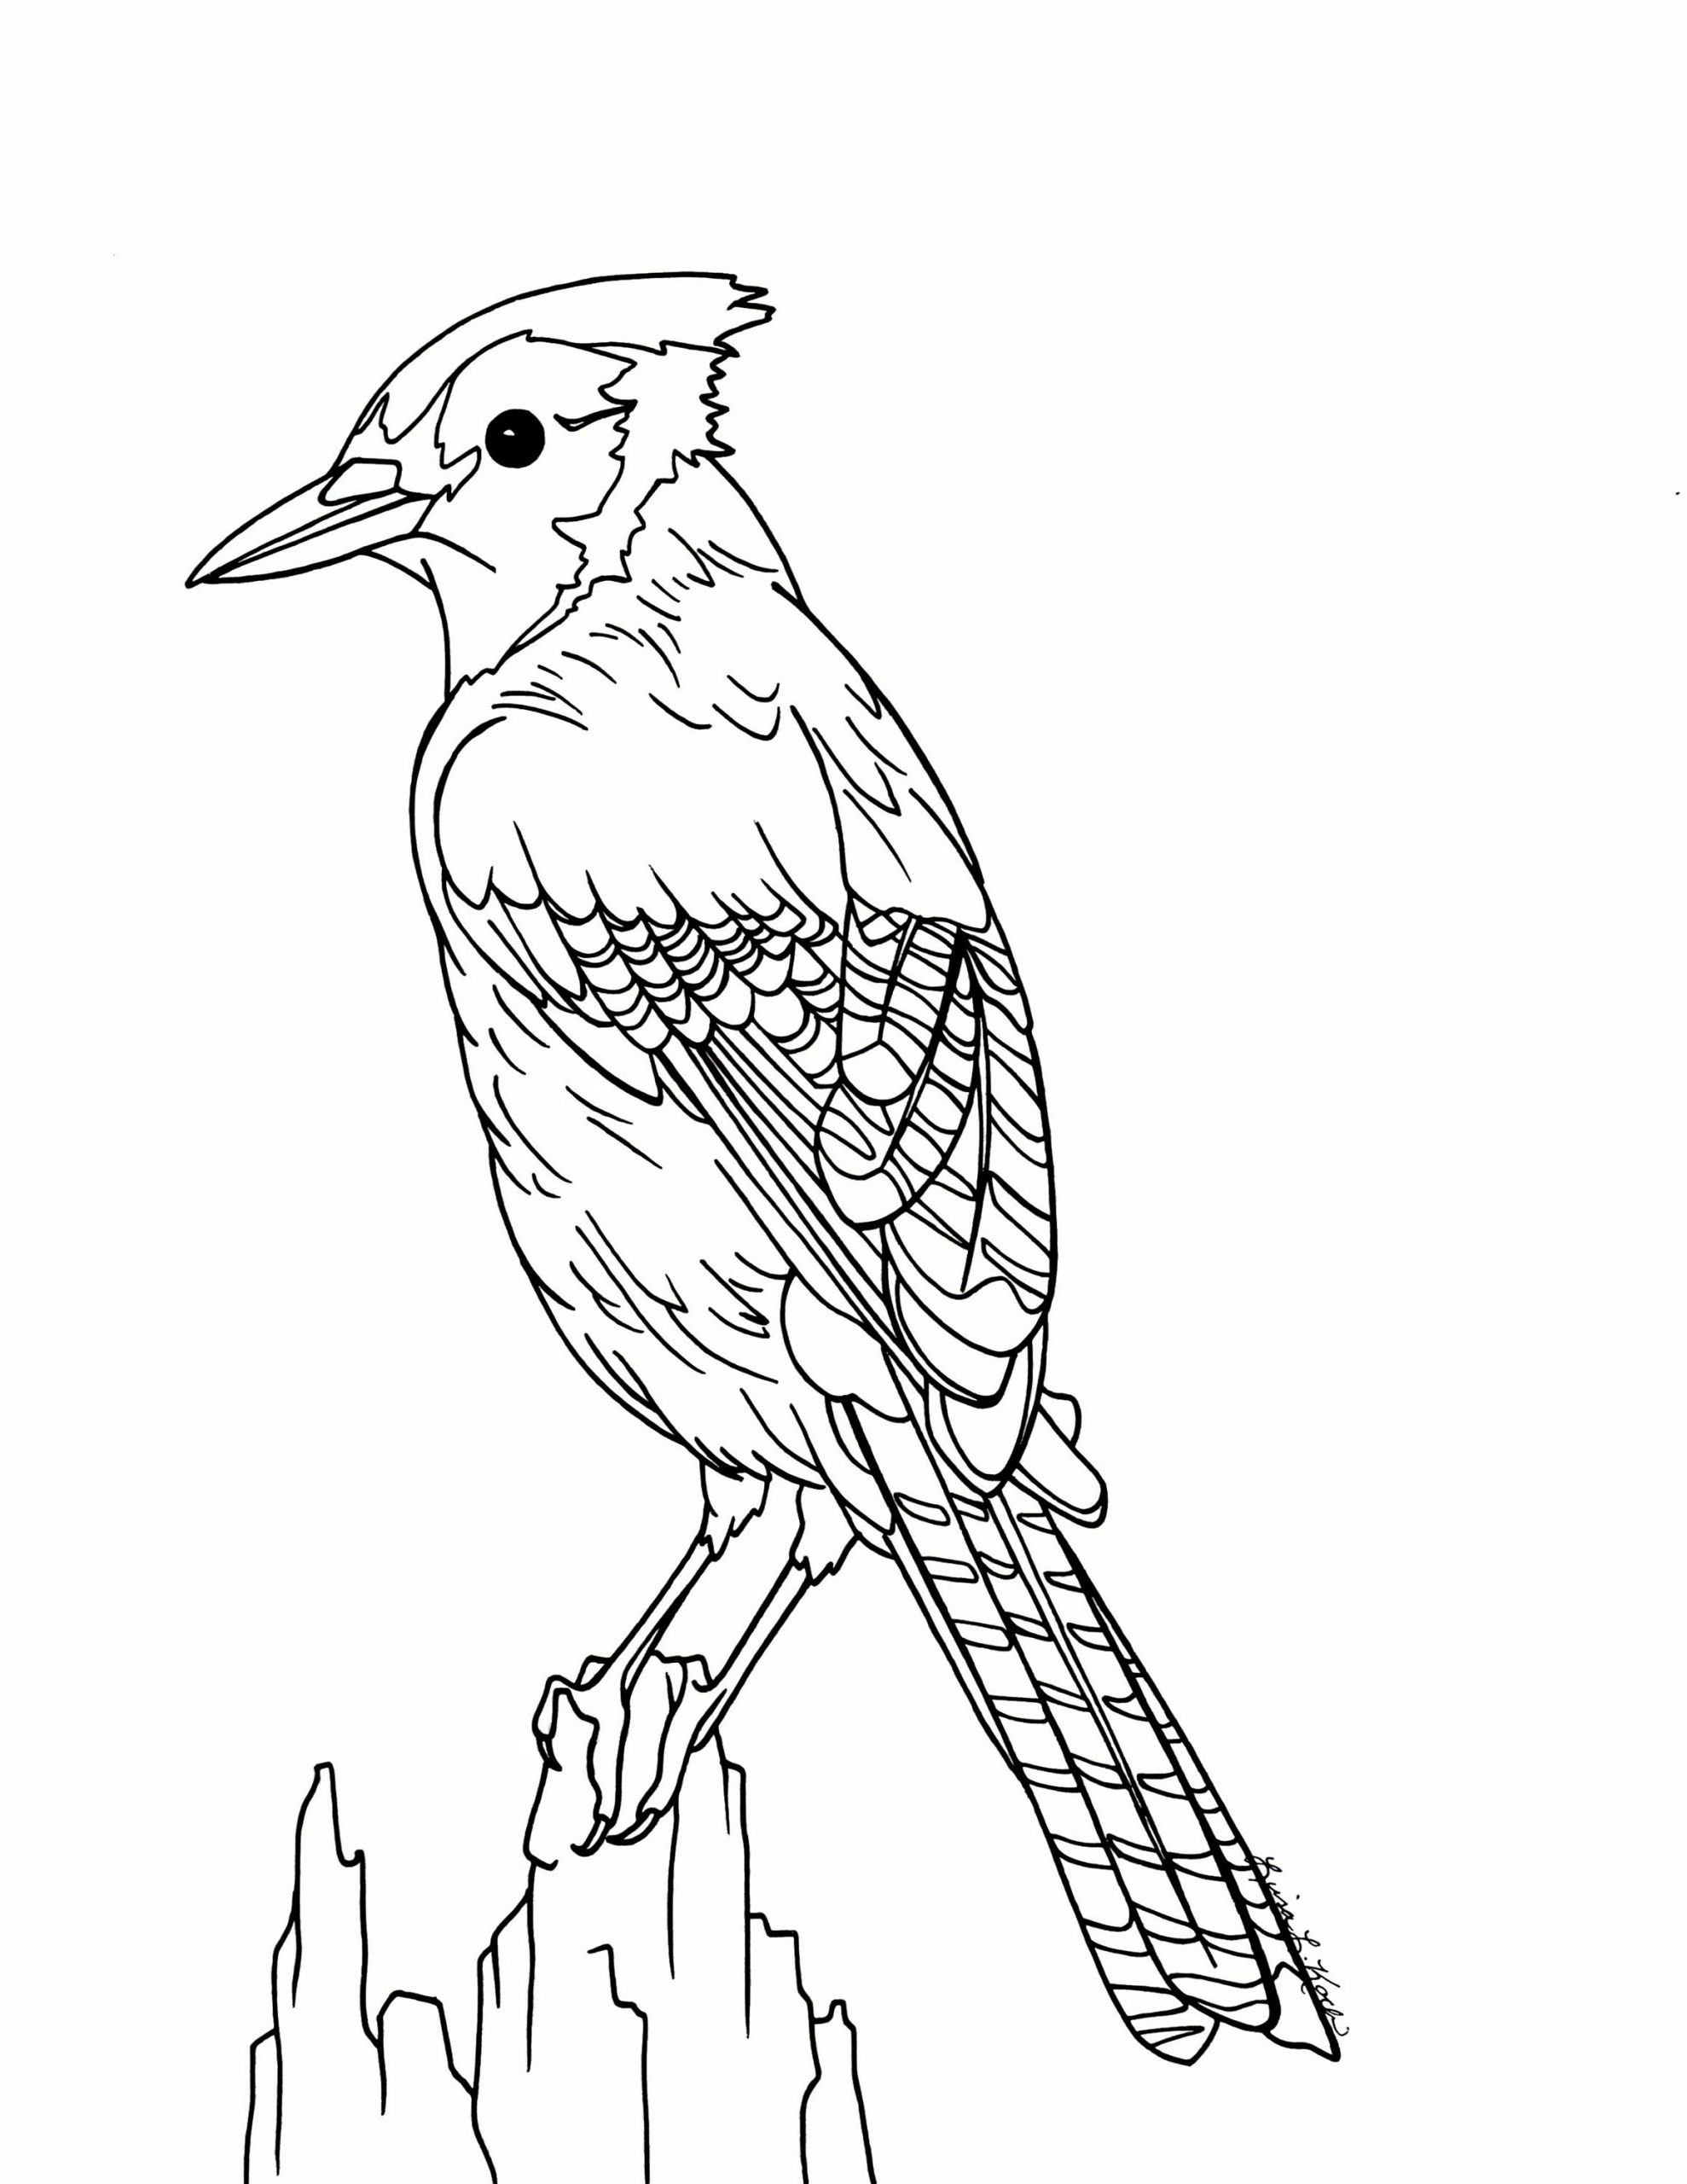 blue jay coloring page printable Blue jay coloring pages